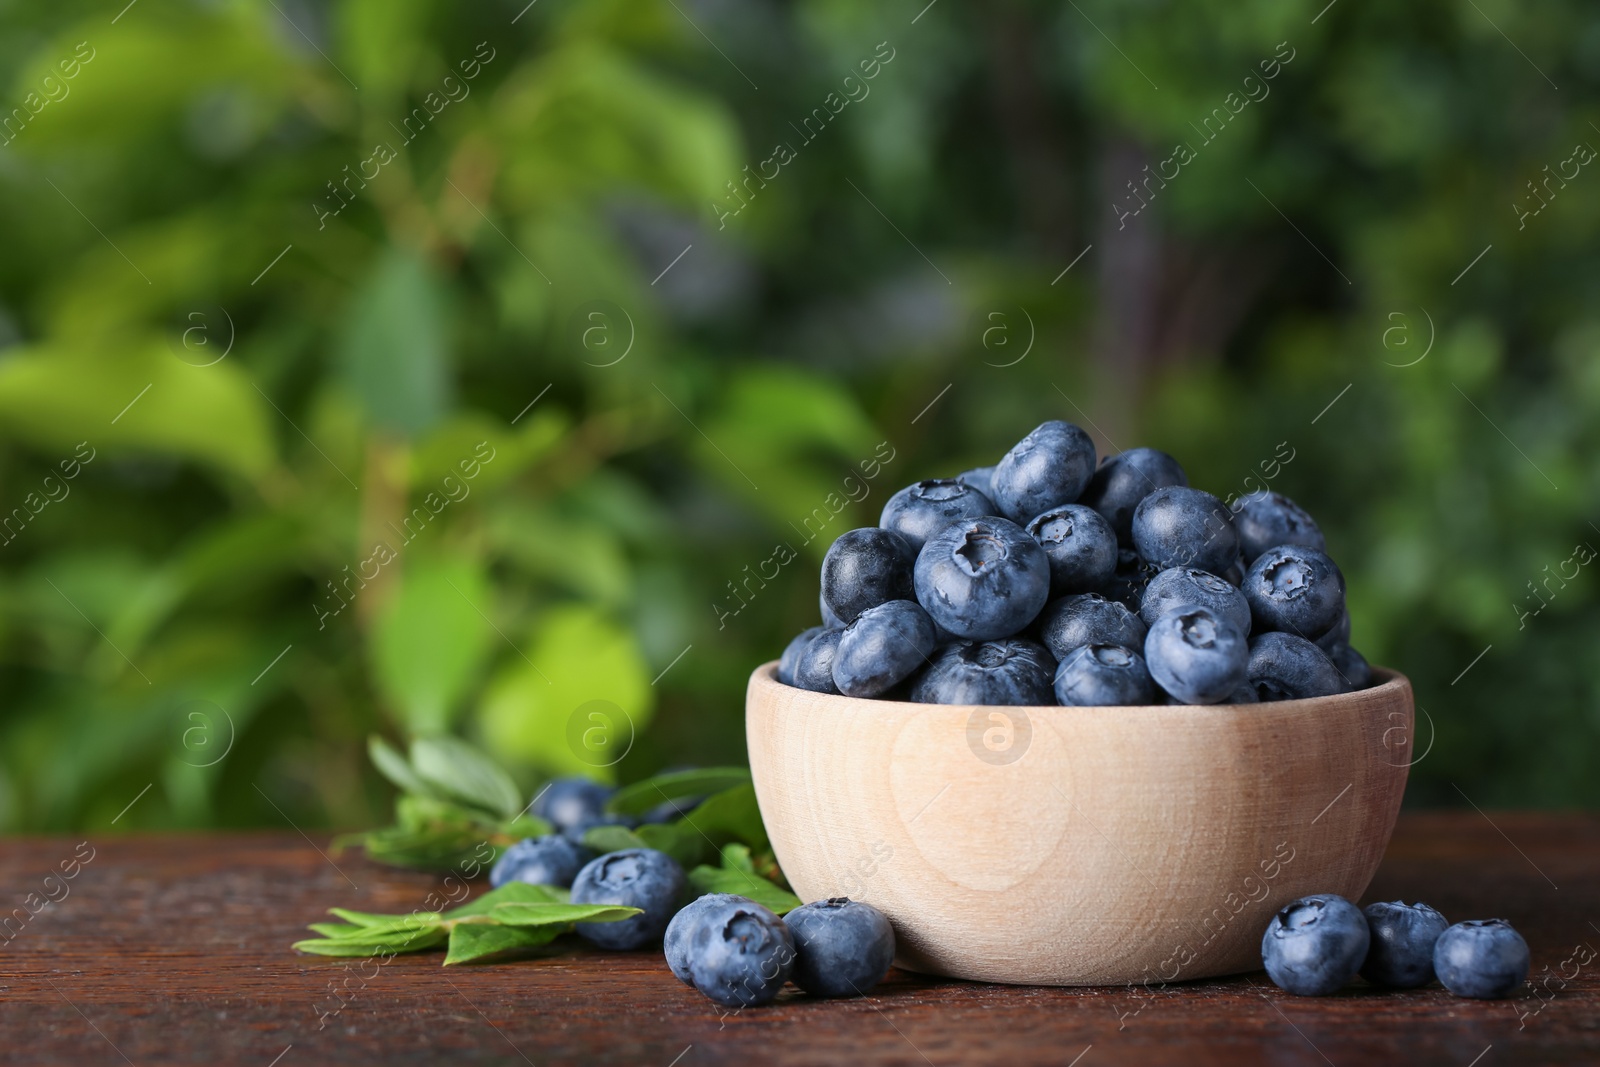 Photo of Tasty fresh blueberries and green leaves on wooden table outdoors, space for text